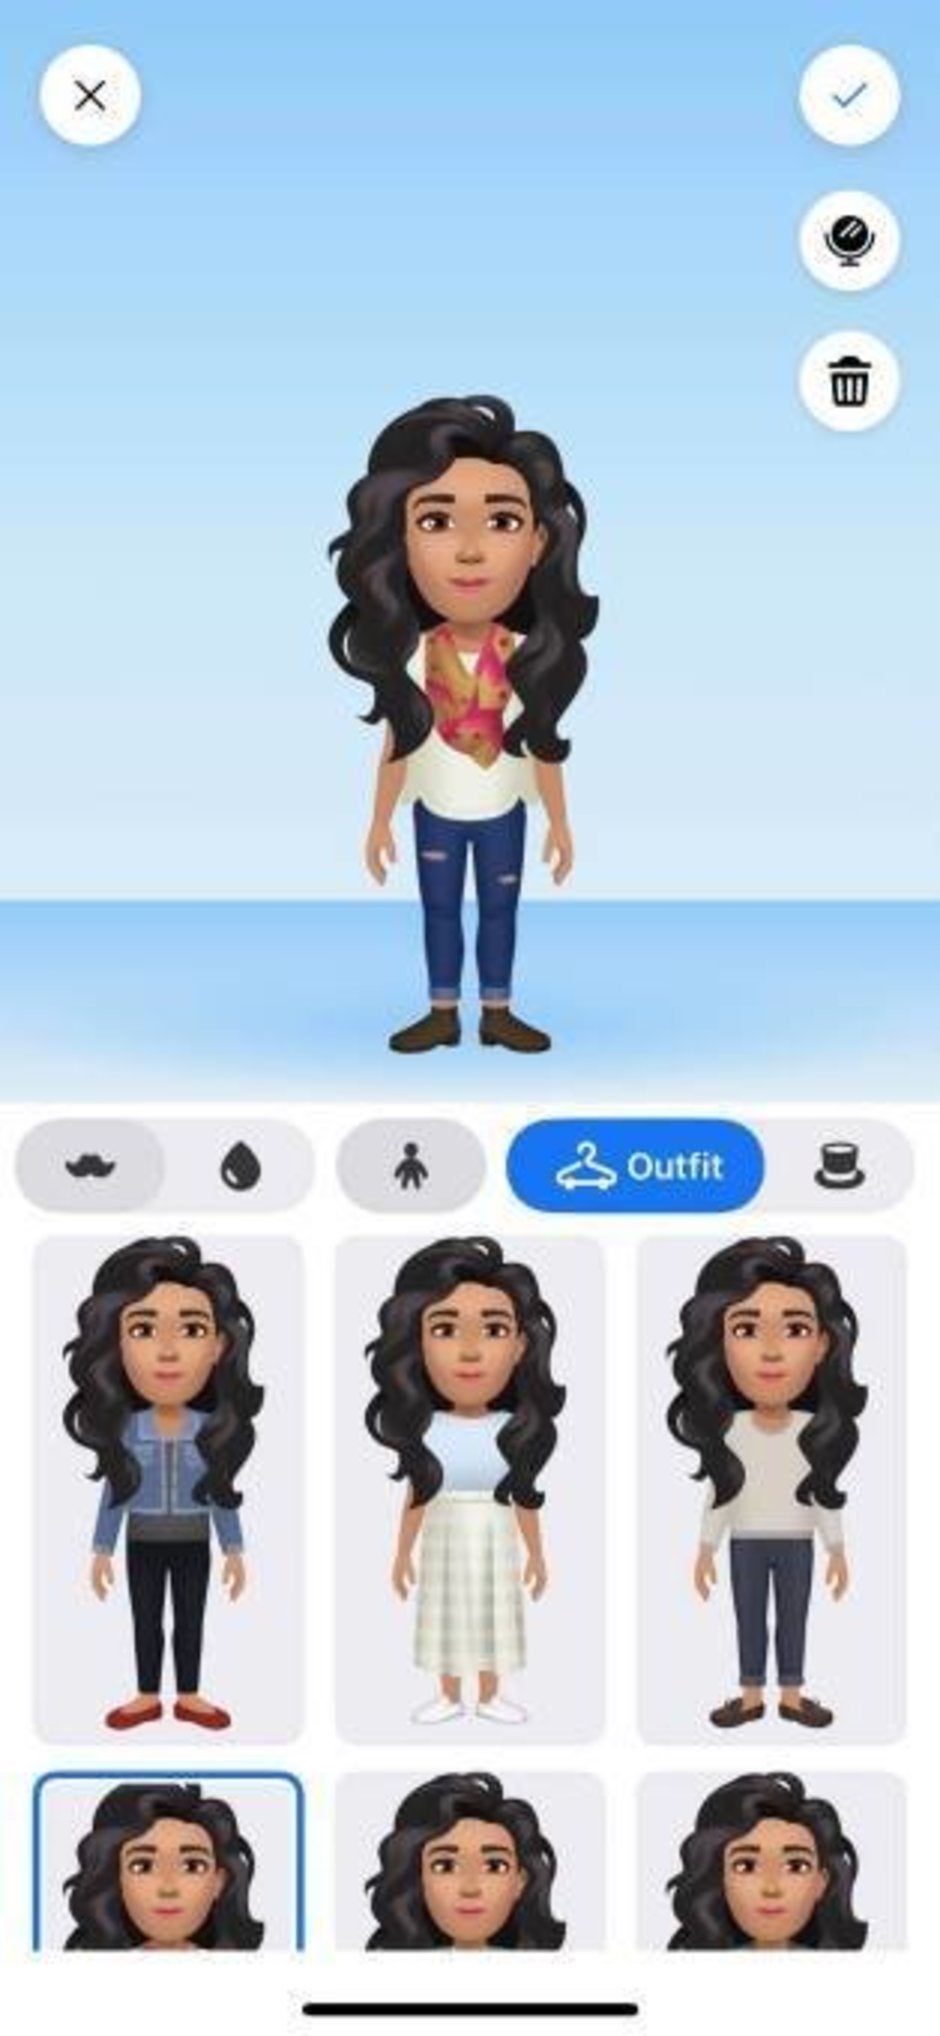 Facebook Avatar creation tool - Facebook launches new Avatar feature for News Feed and Messenger